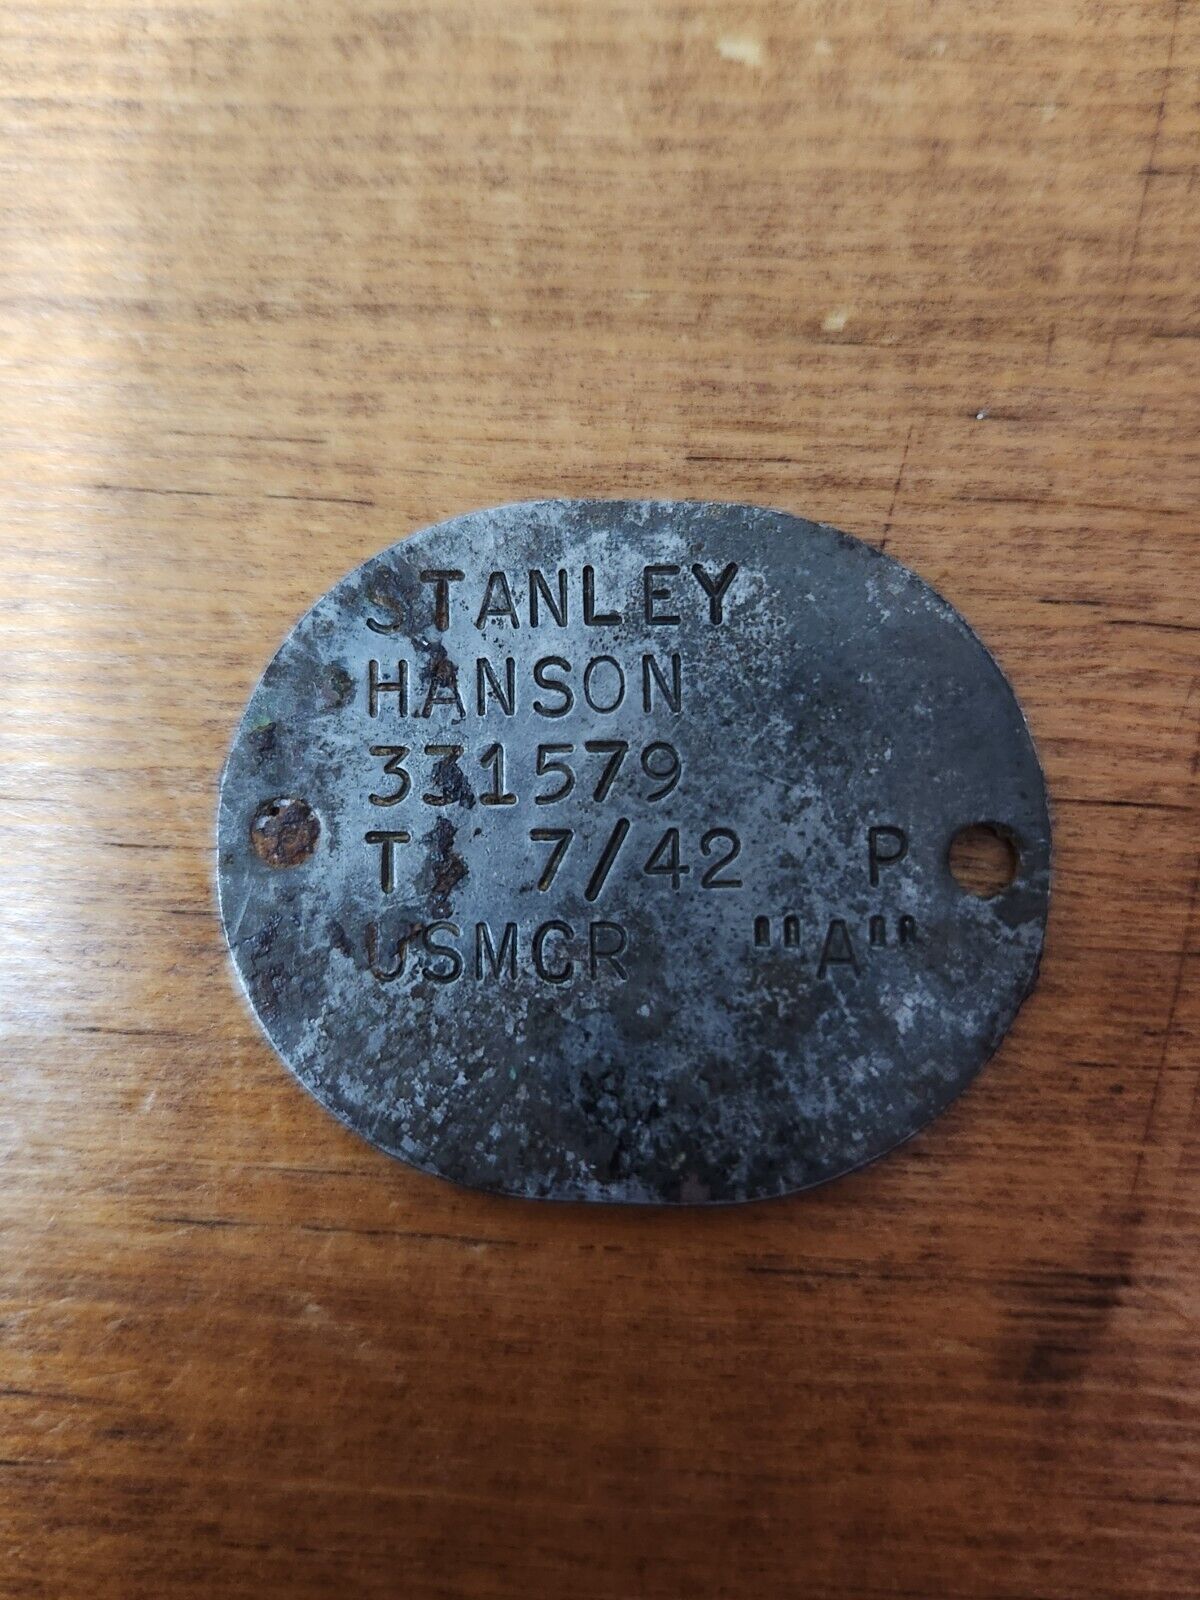 Ww2 USMCR Dog Tag Named To Stanley Hanson Dug On Guadalcanal With Research